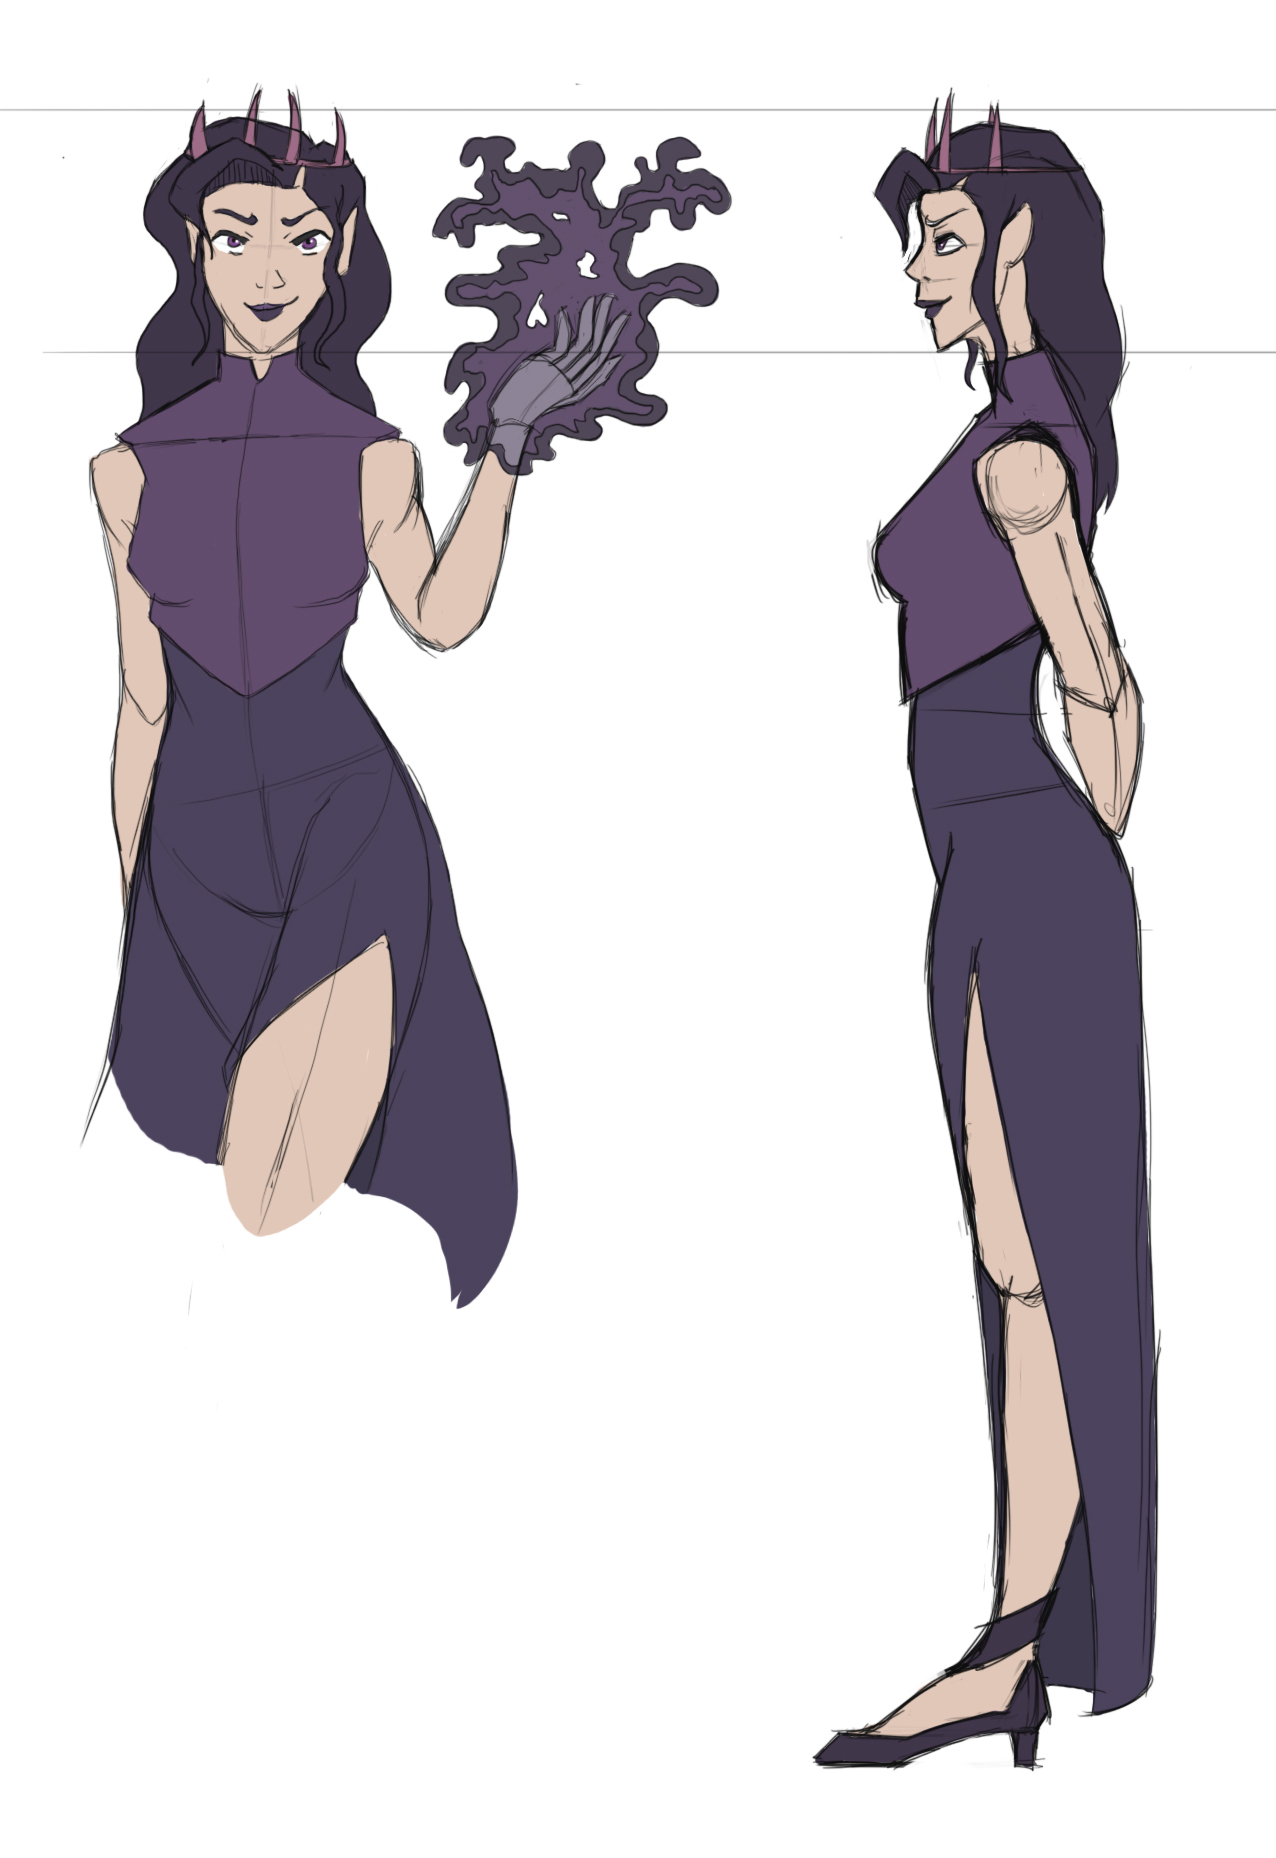 Pale woman with long purple dress on and thick purple top armor – wielding dark magic in her left hand. Side view reveals her with hands behind her back. Wearing heels and has a slit in her dress. Also wearing a dark crown, donning purple lips and eyes.